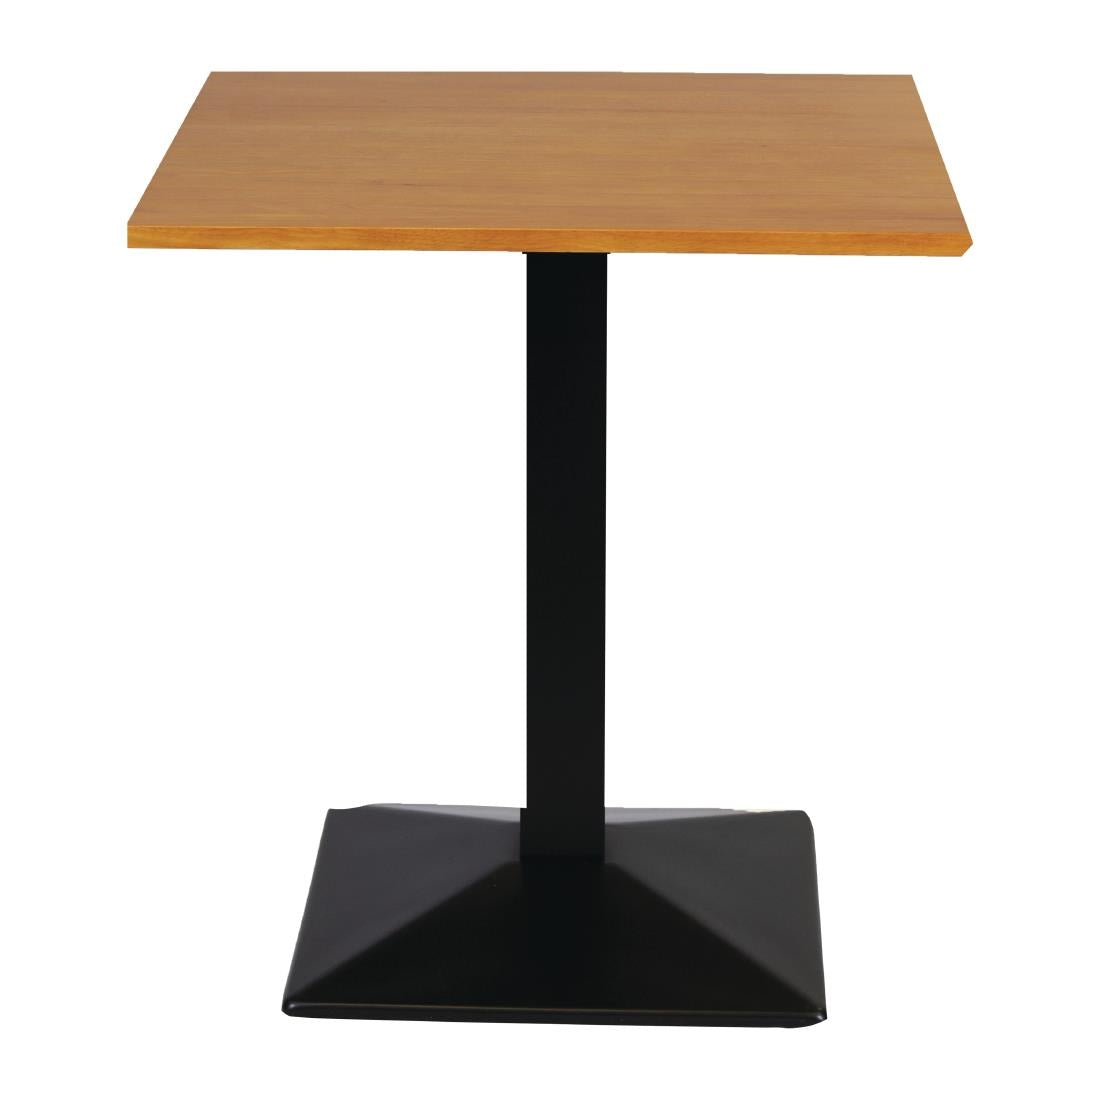 FT502 Turin Metal Base Pedestal Square Table with Soft Oak Top 700x700mm JD Catering Equipment Solutions Ltd